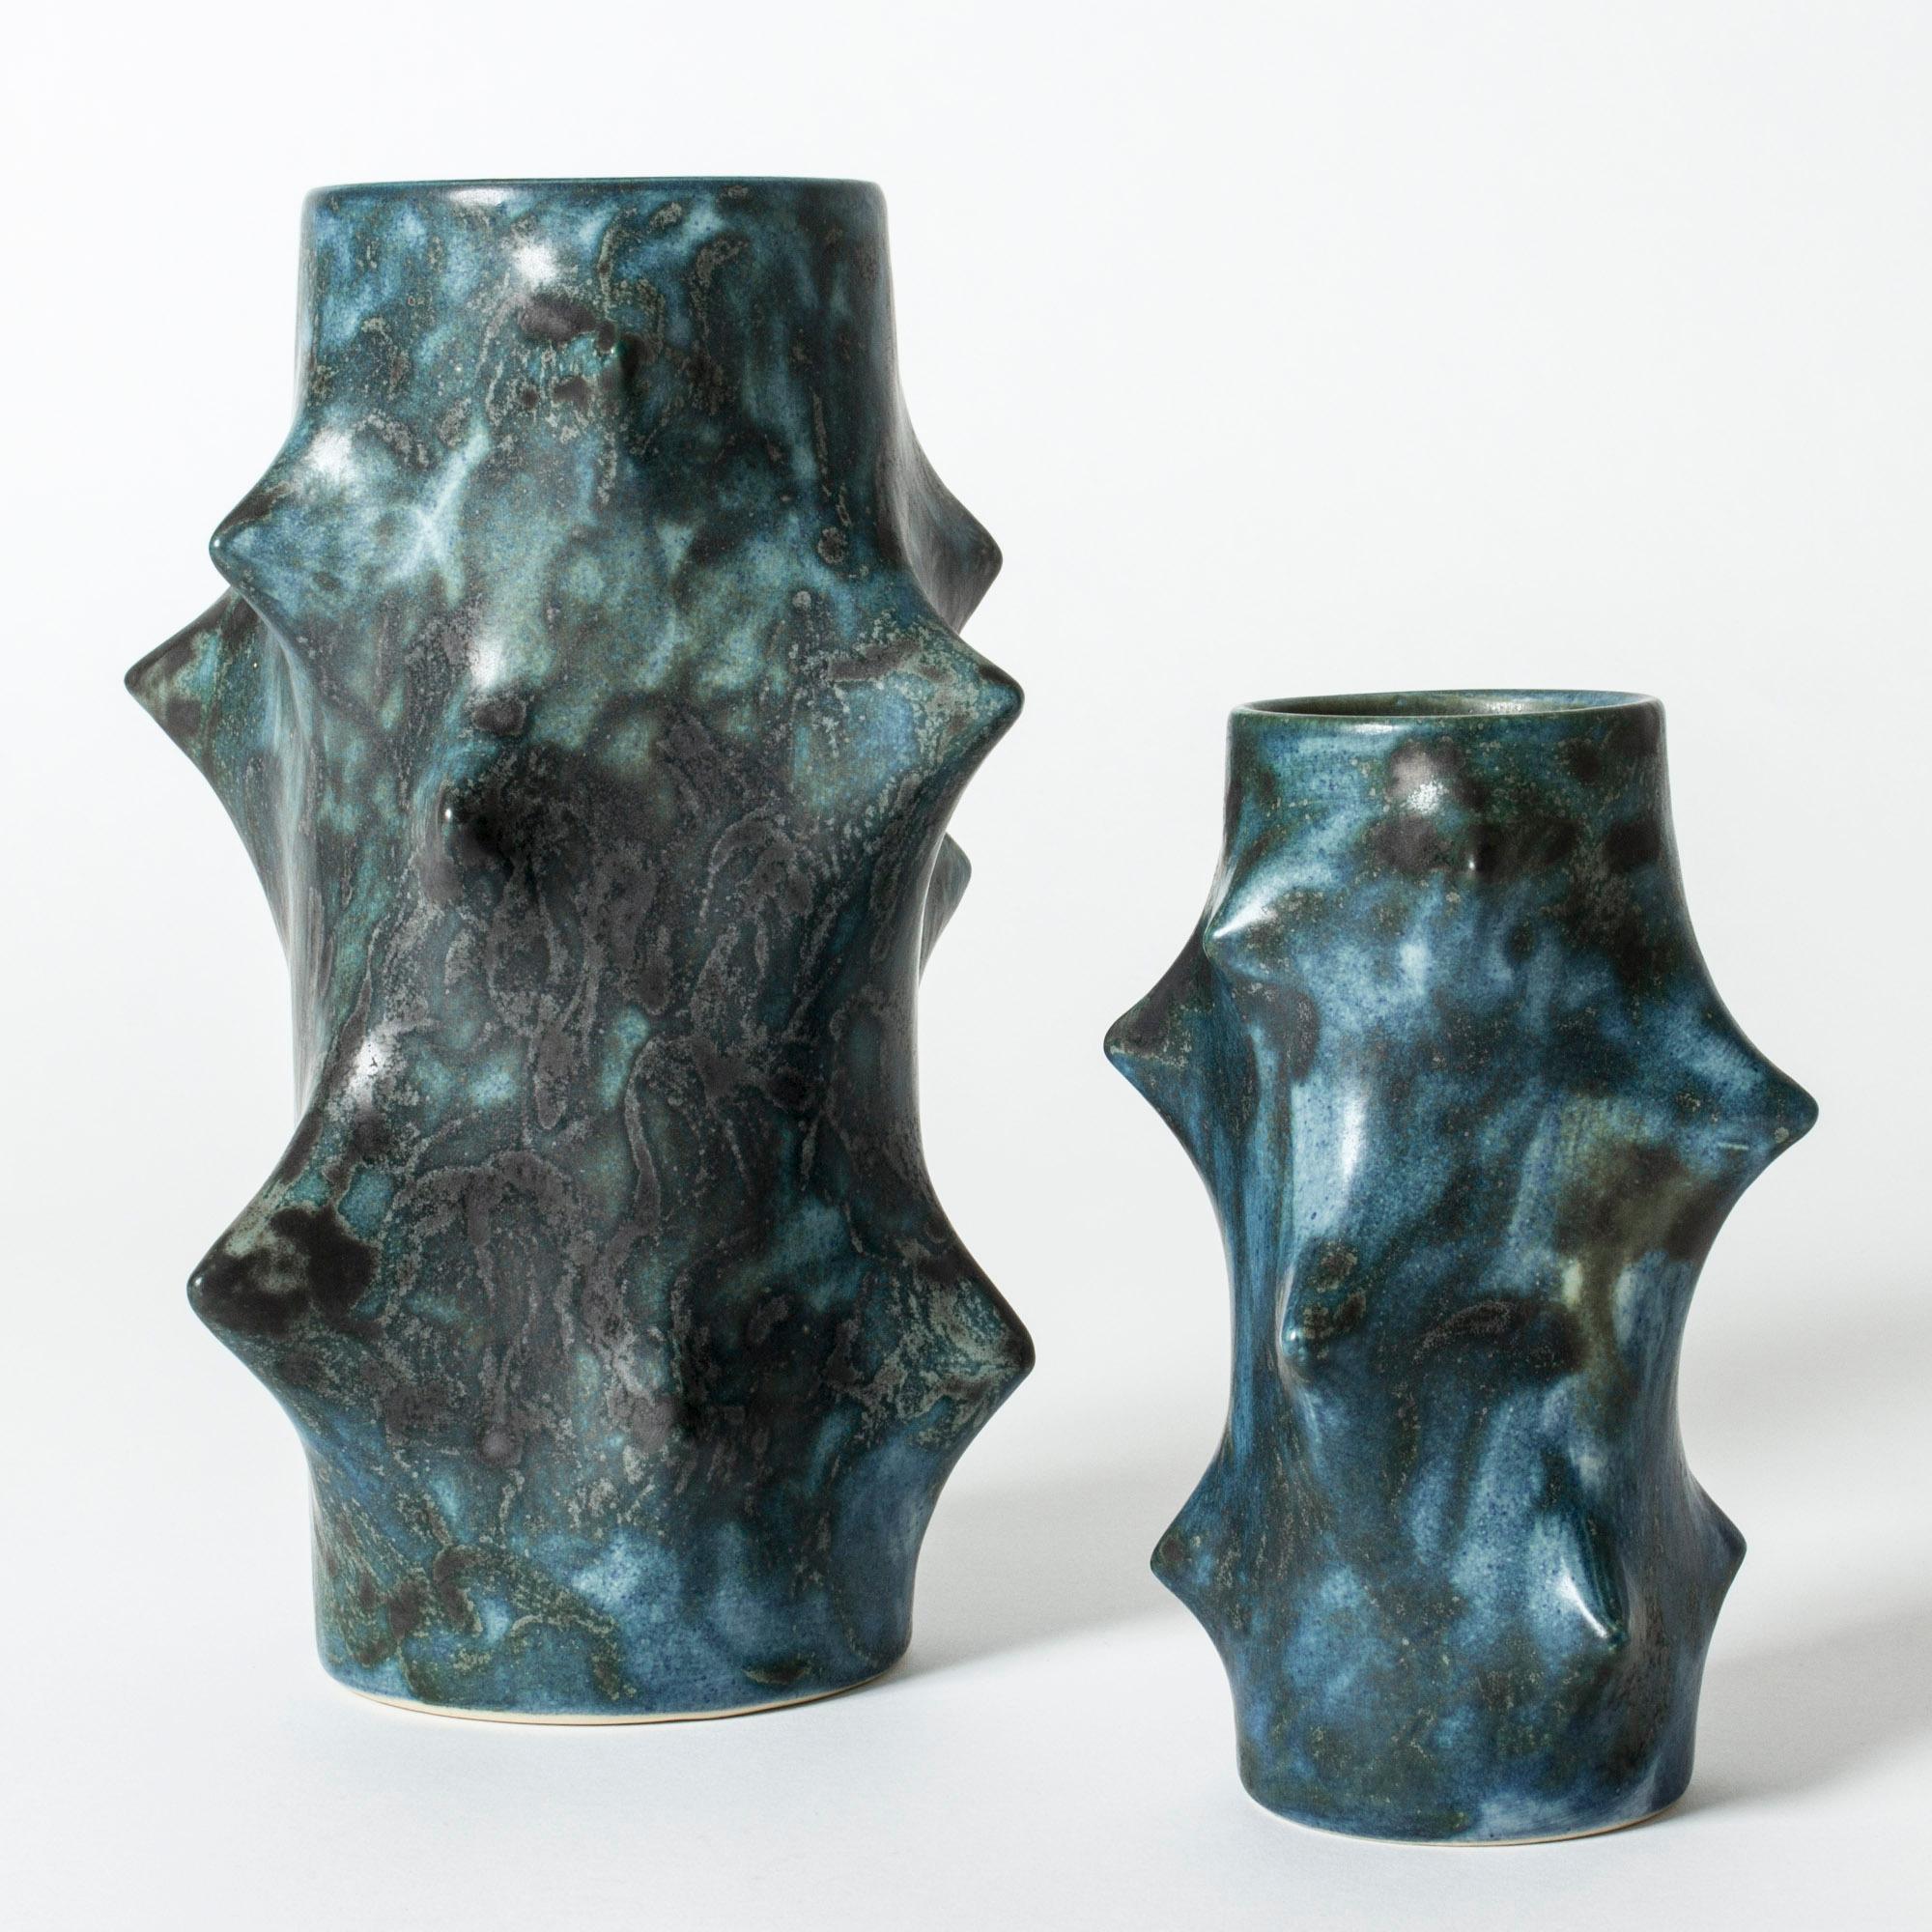 Pair stoneware vases by Knud Basse, in cactus-like forms, with points pressing outwards in a very expressive way. Dark petroleum colored glaze with nuances, metallic sheen.